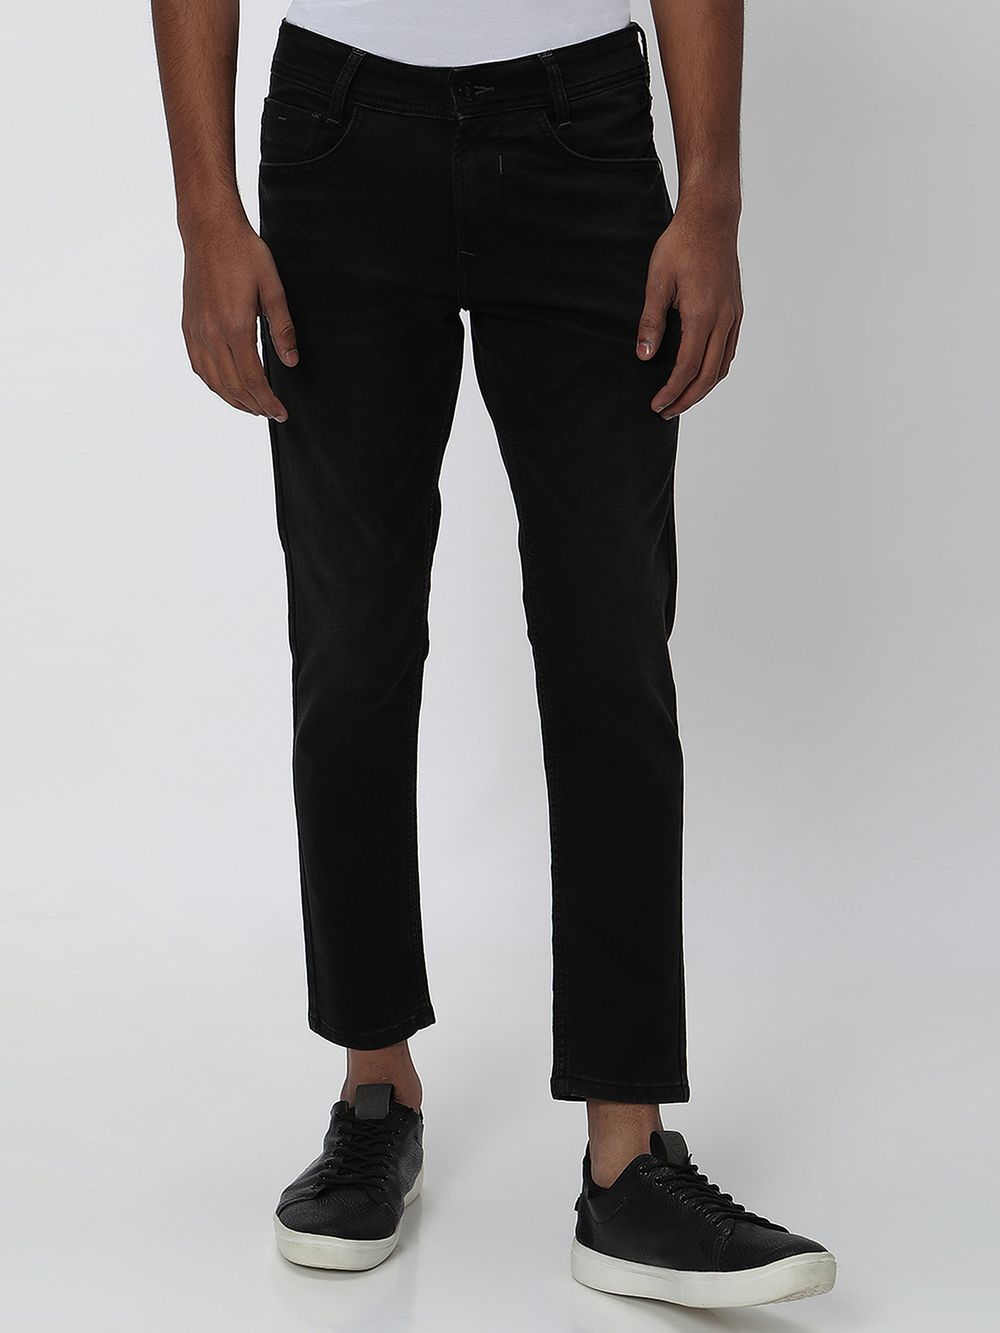 Black Ankle Length Denim Deluxe Stretch Jeans